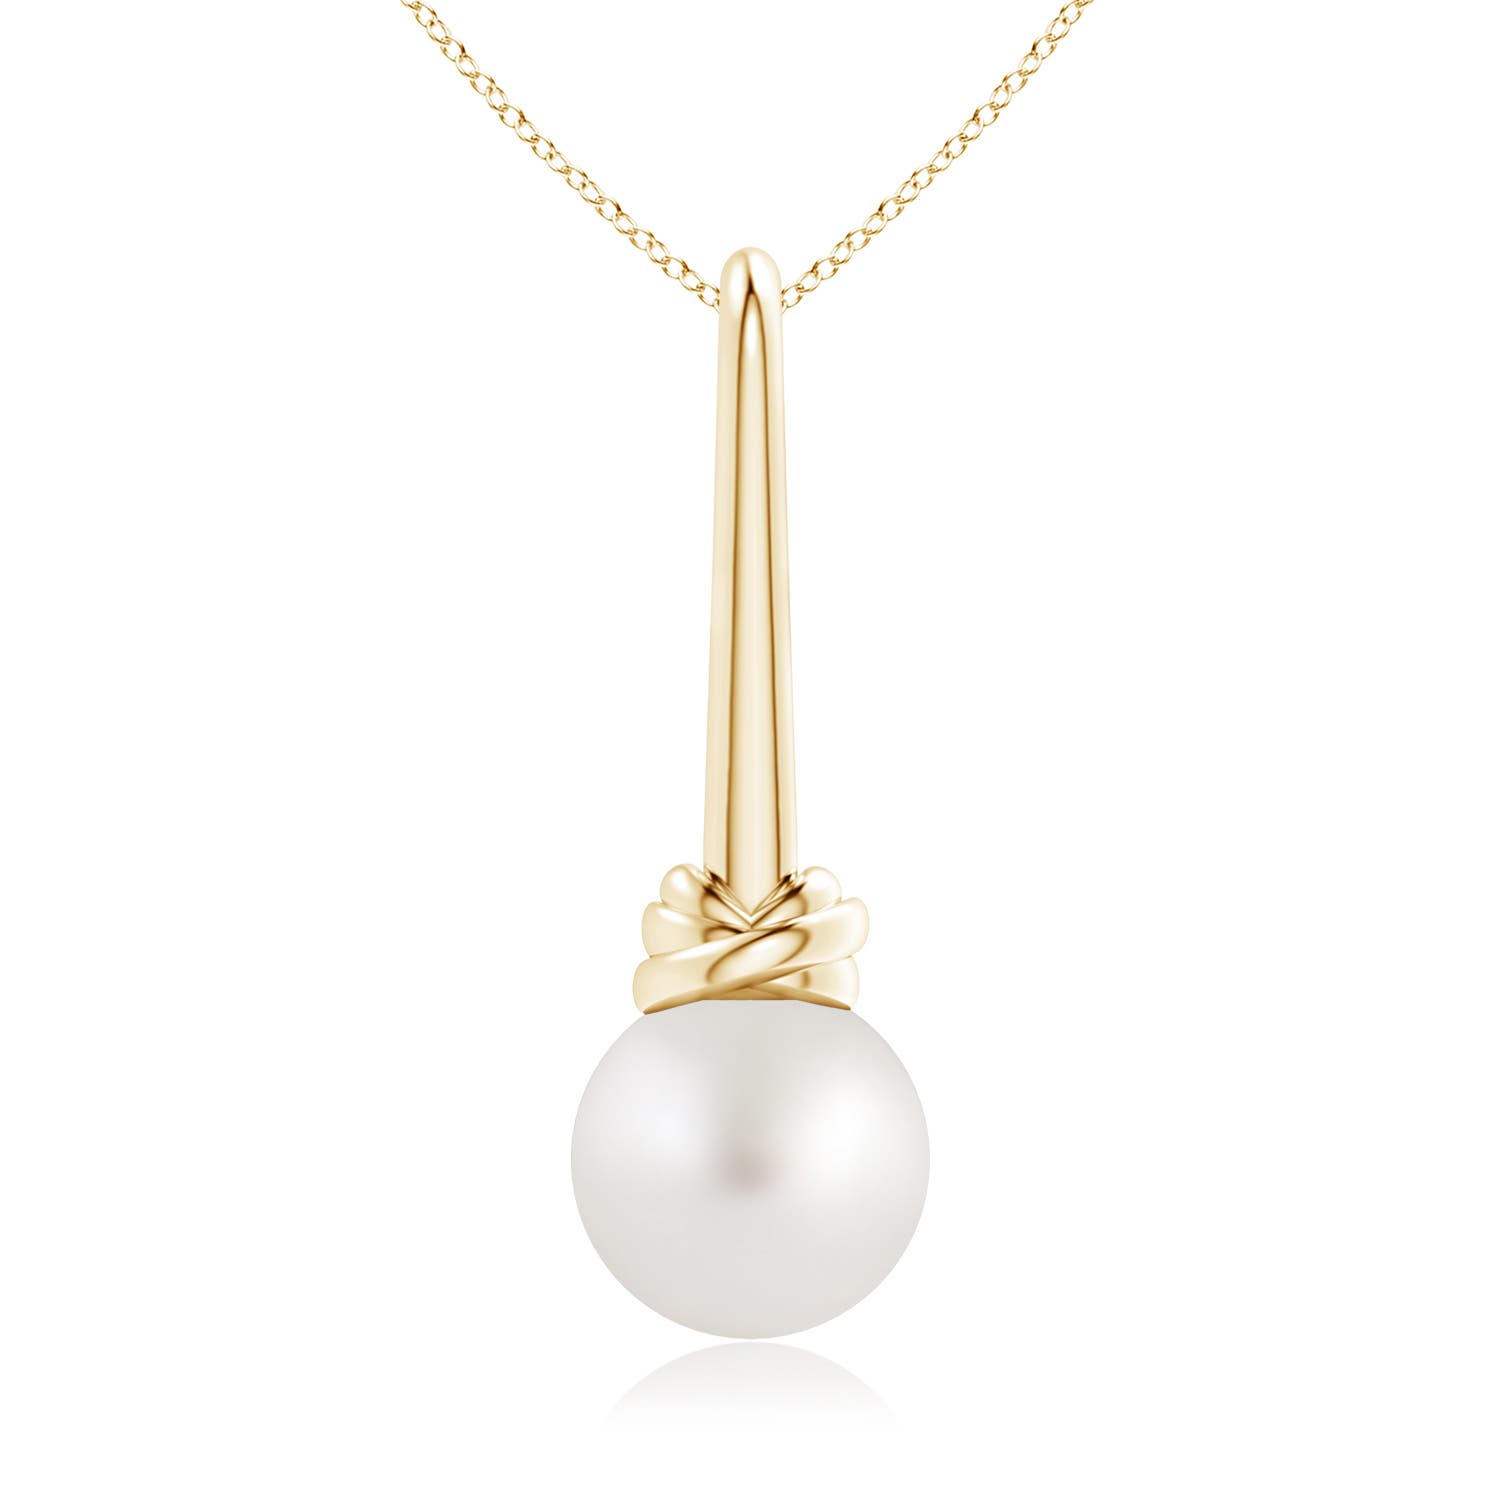 AA - South Sea Cultured Pearl / 7.2 CT / 14 KT Yellow Gold